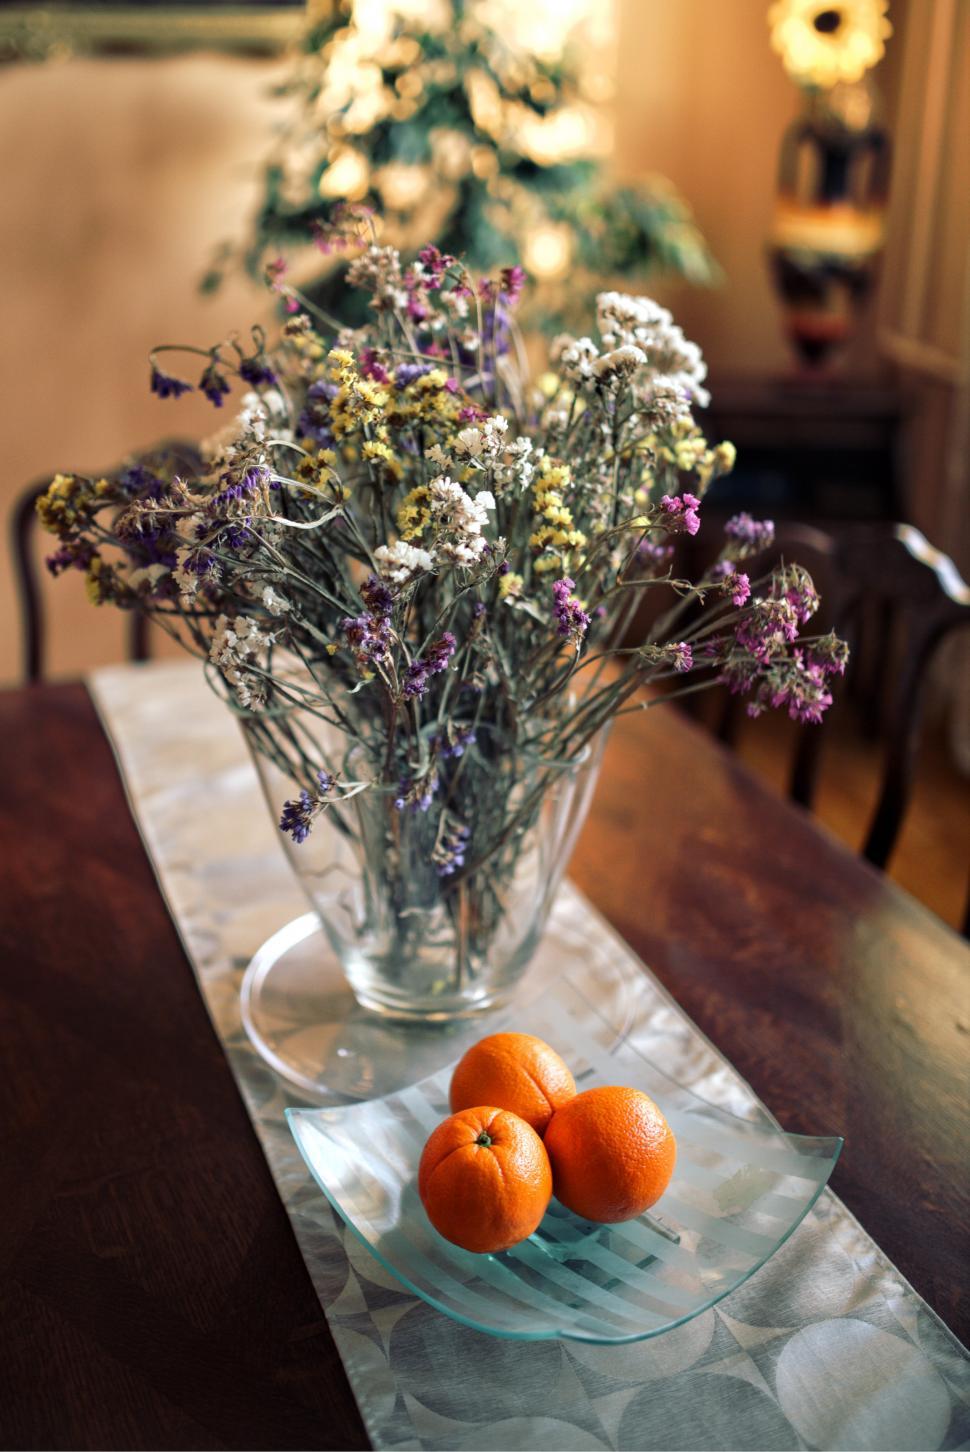 Free Image of Glass Vase Filled With Oranges on Table 